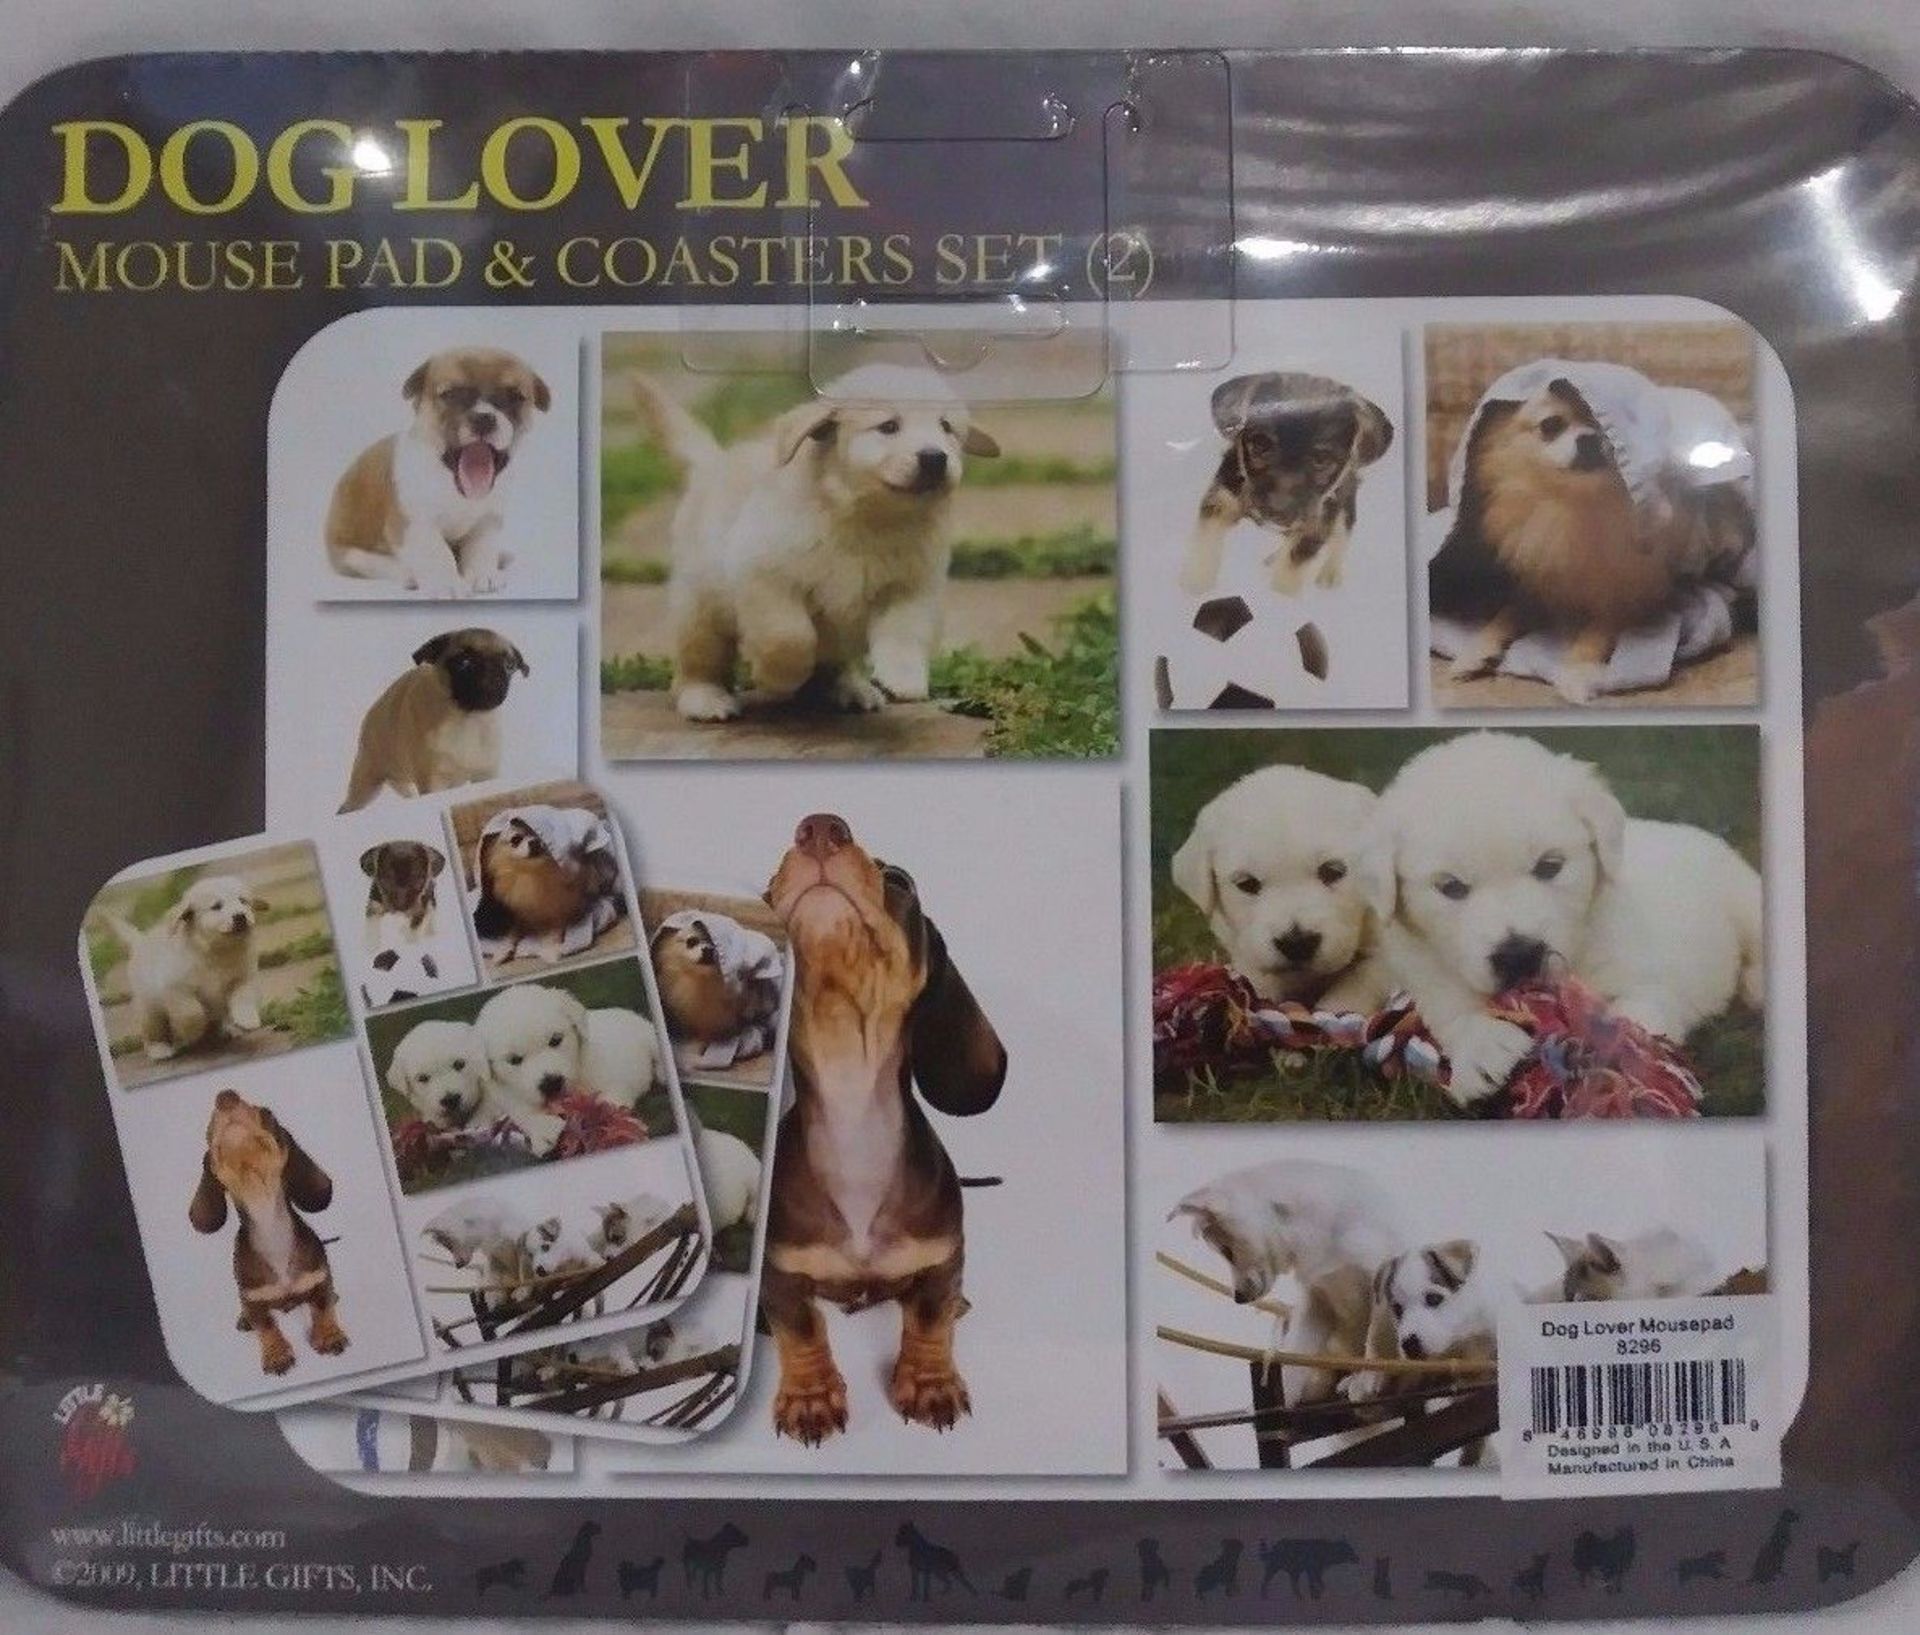 90 X DOG LOVER MOUSE PAD & COASTERS SET (2) - Image 4 of 4